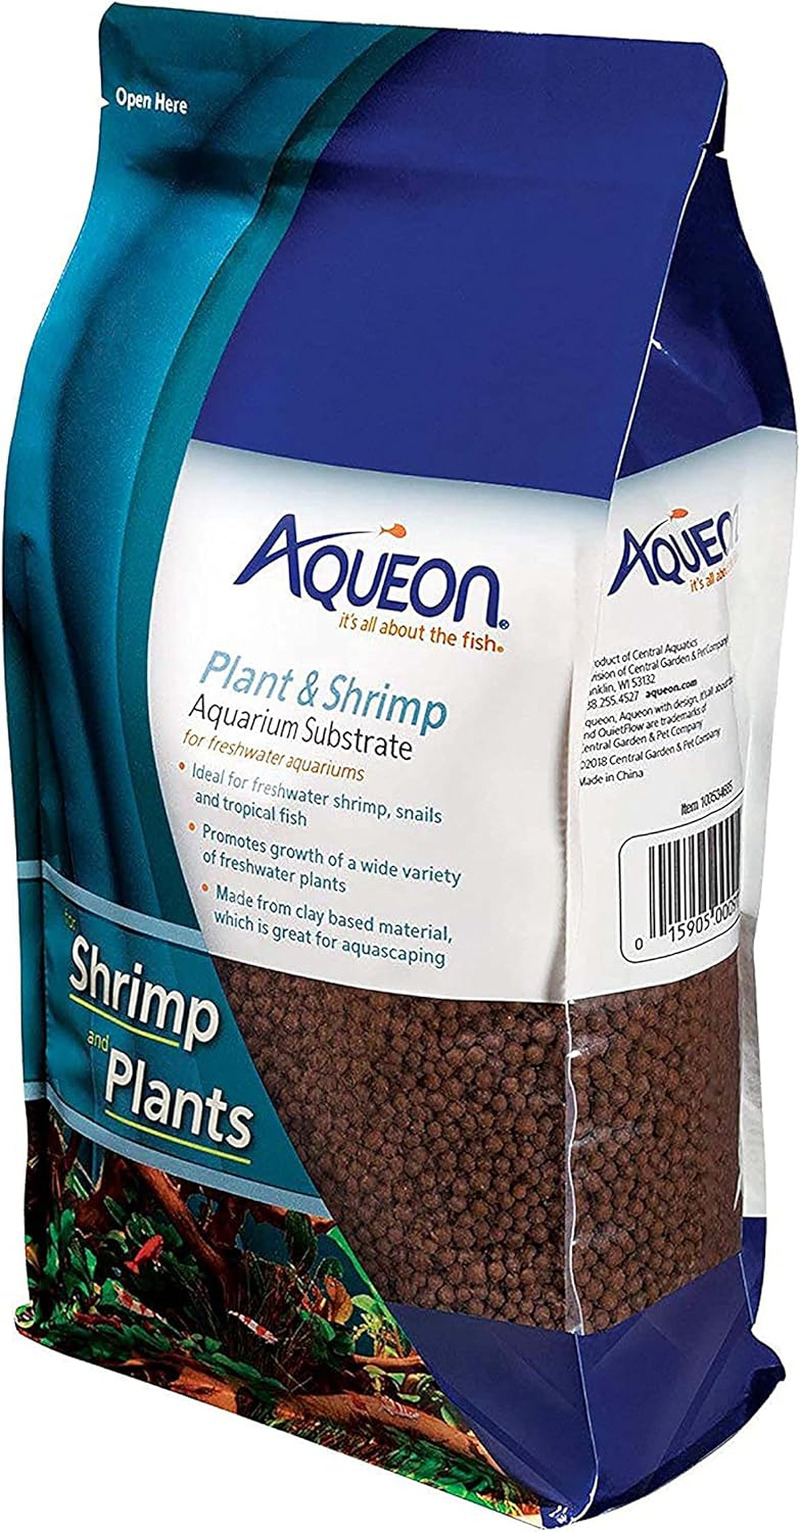 Aqueon Plant & Shrimp Aquarium Substrate Made from Clay Based Material 5 Pounds